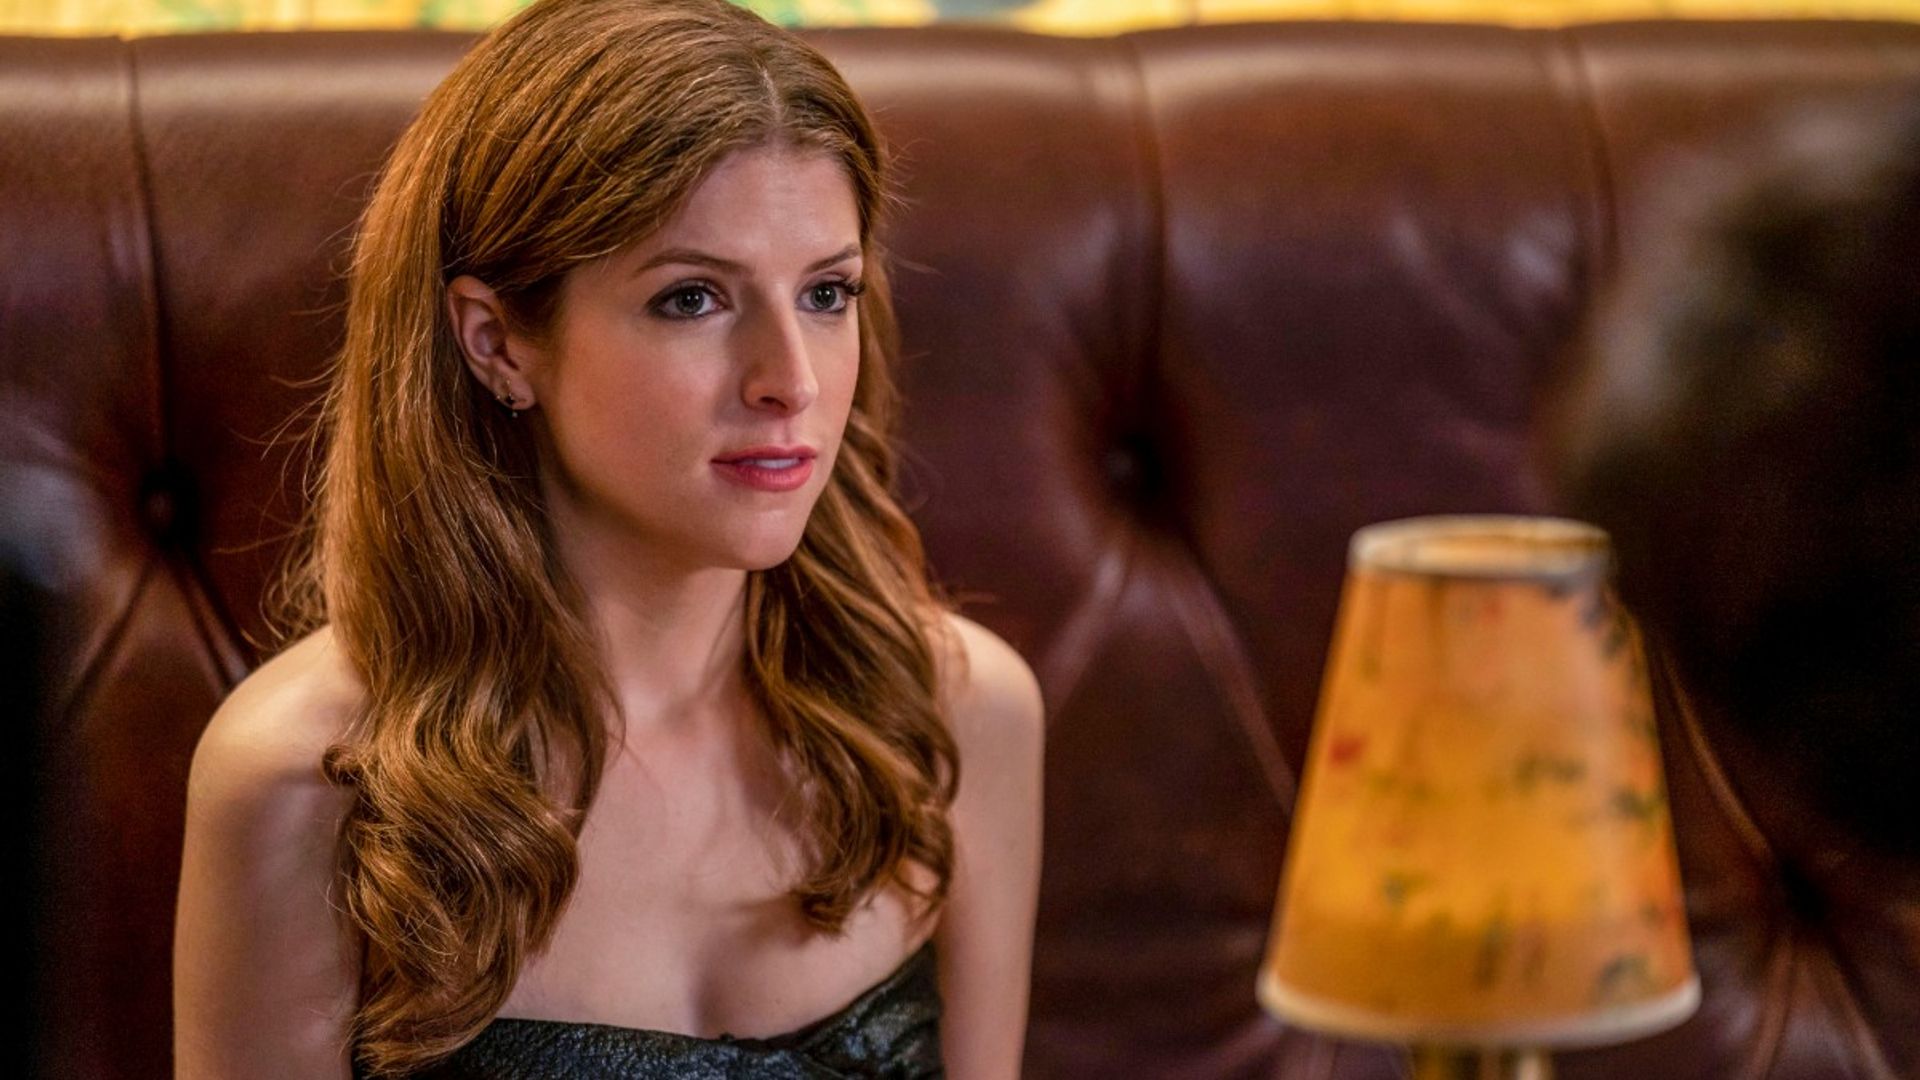 Fan reactions are here for Anna Kendrick's BBC show Love Life 